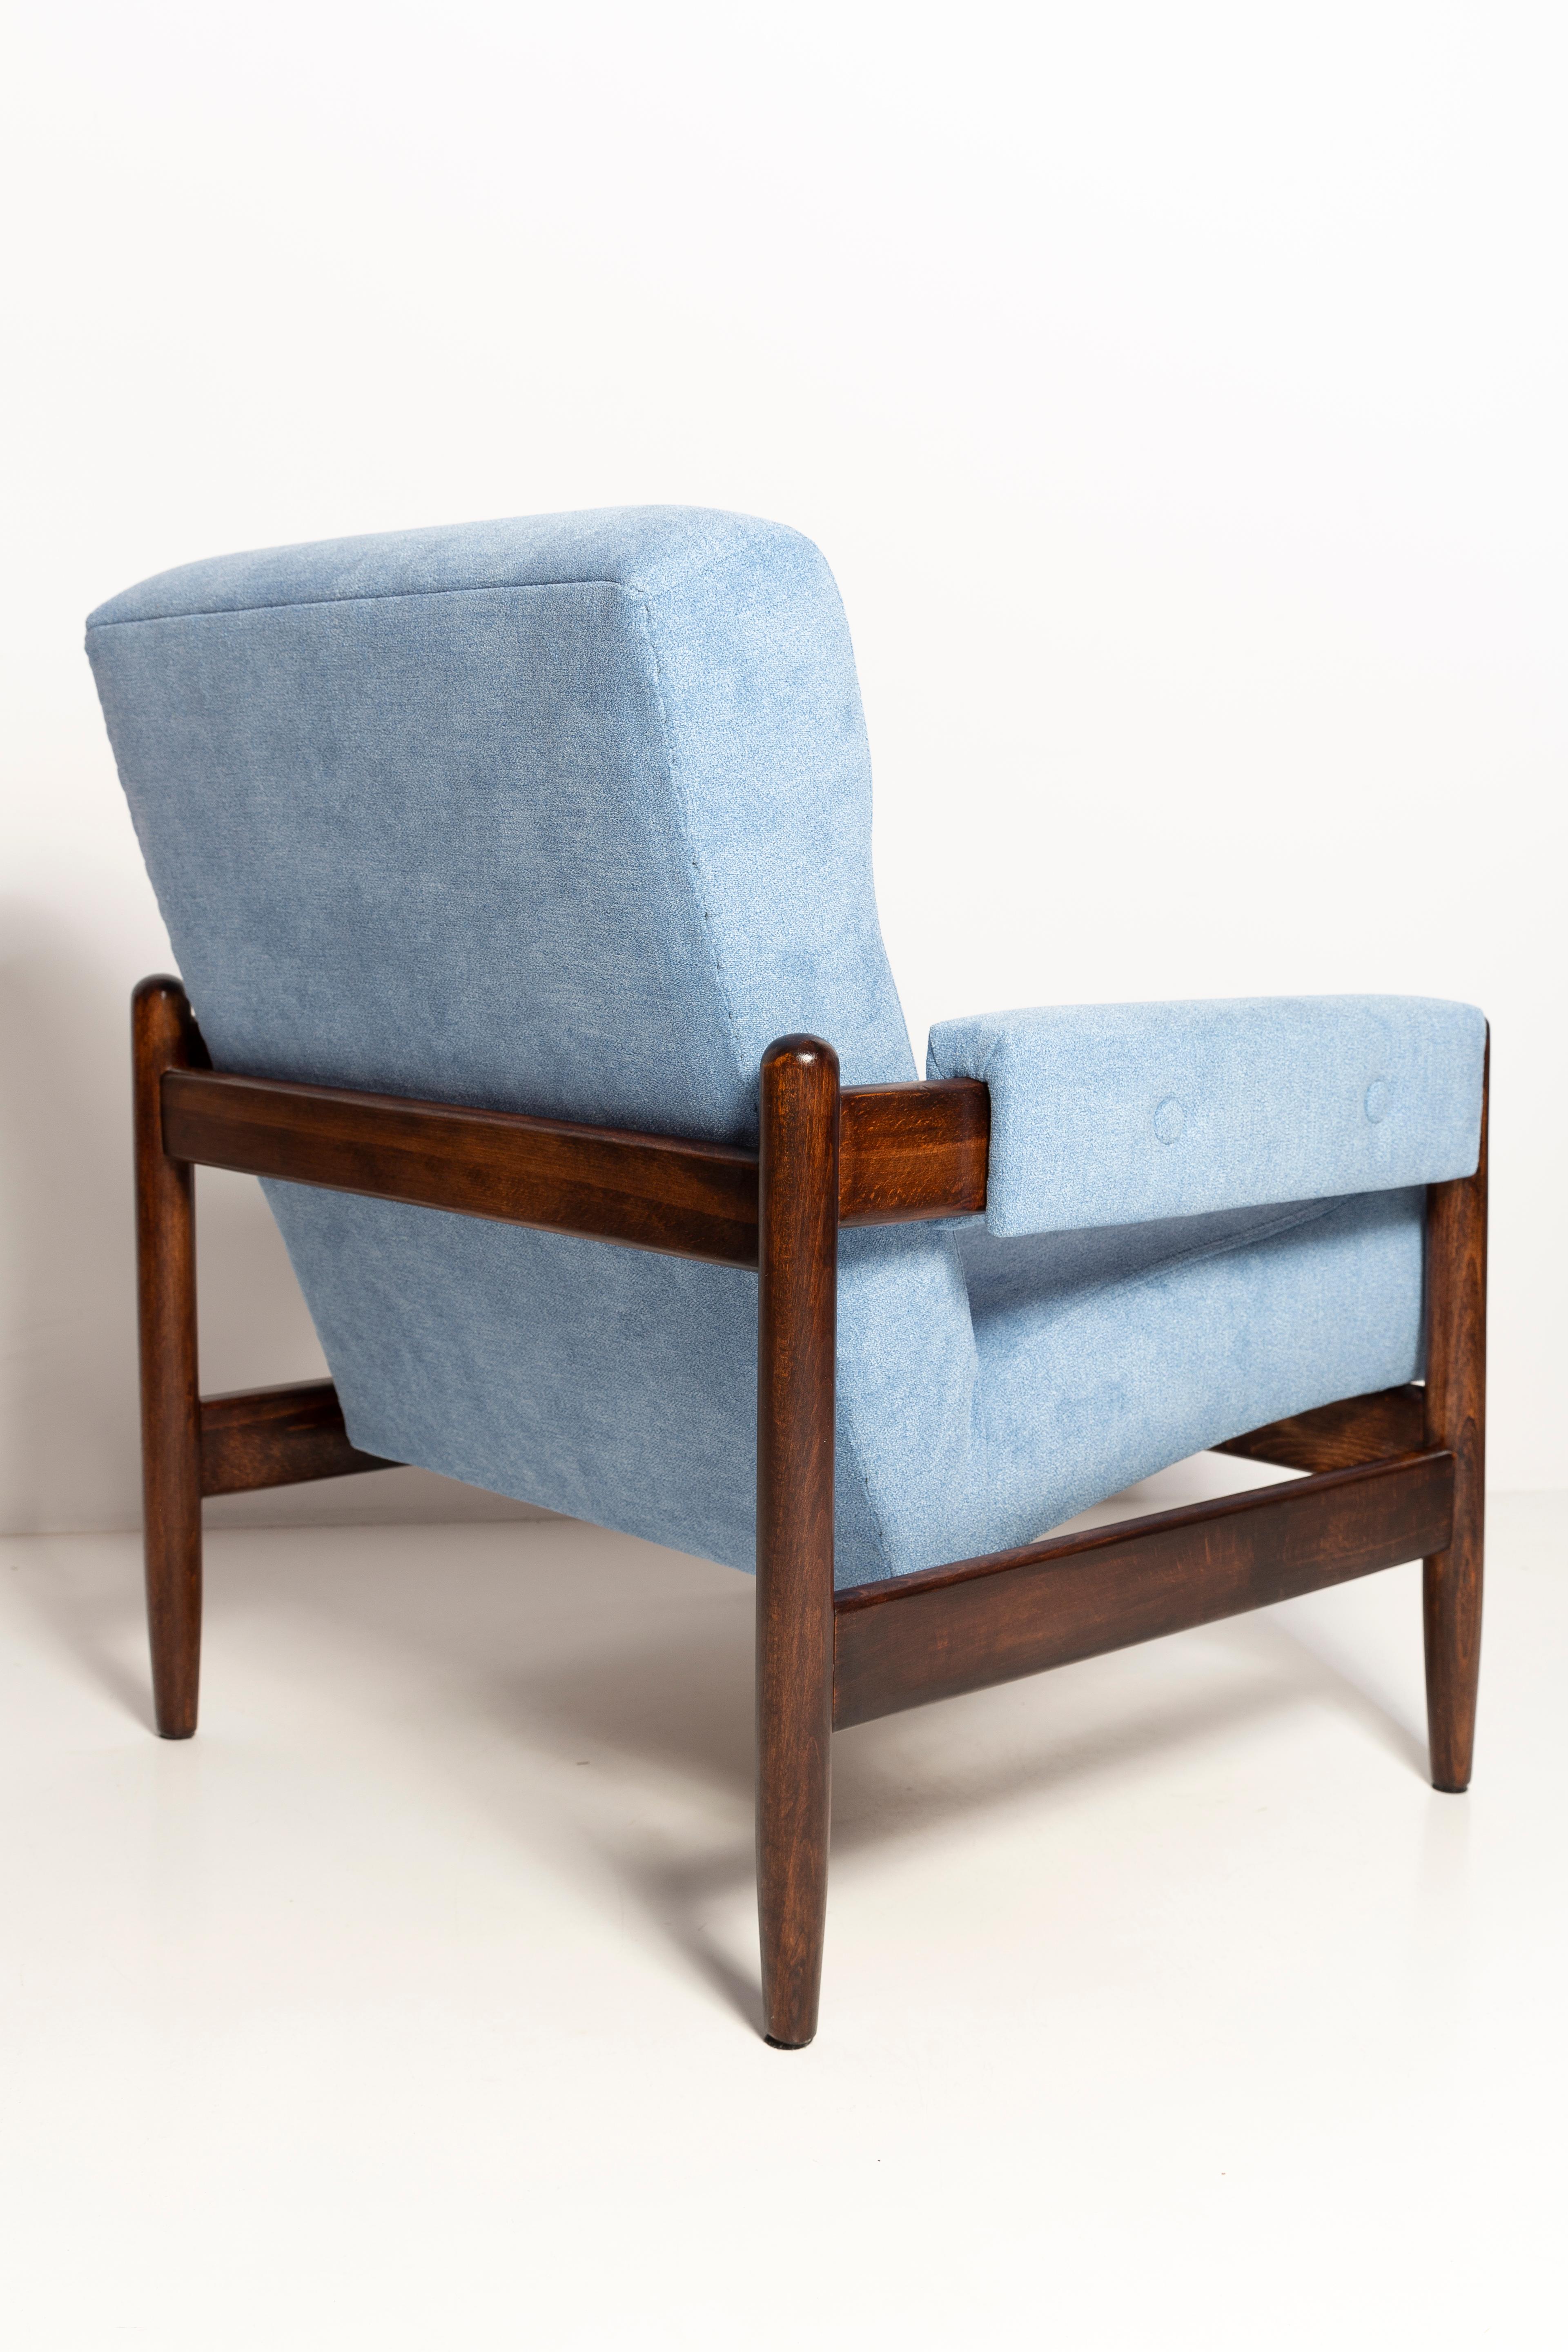 Set of Two Mid Century Blue Velvet Vintage Armchairs, Walnut Wood, Europe, 1960s For Sale 2